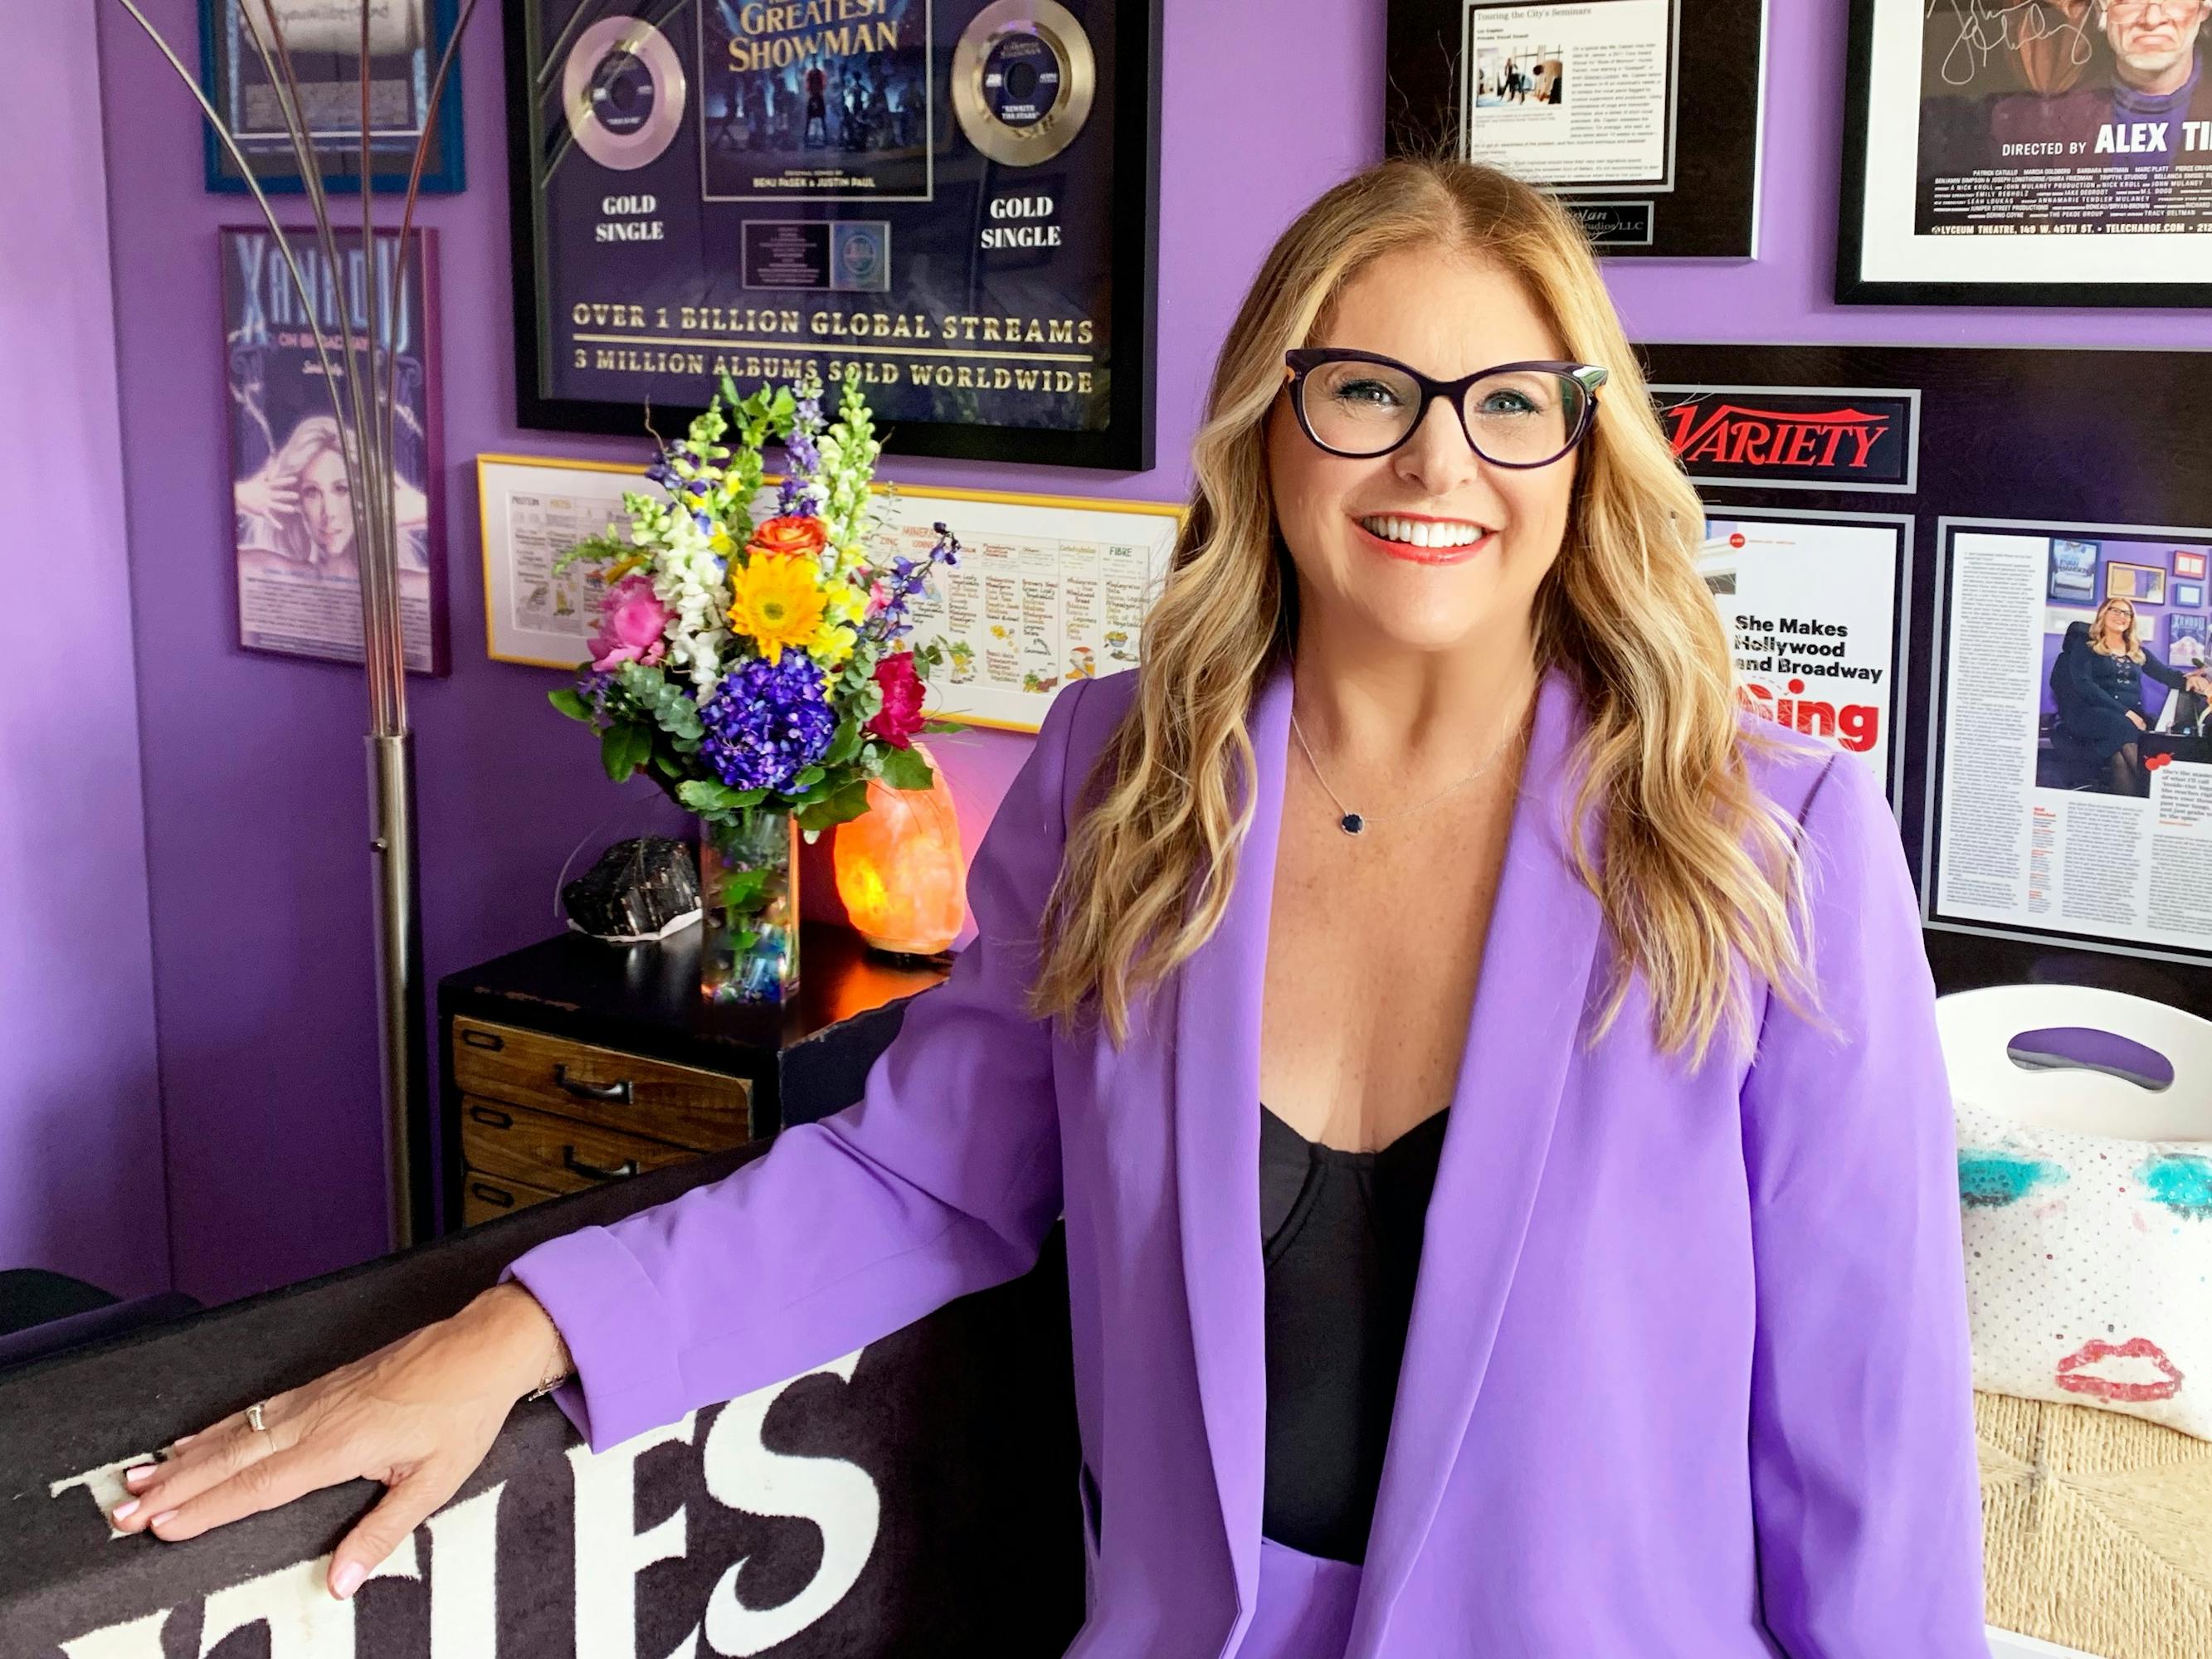 Liz Caplan stands in front of awards plaques reading "Greatest Showman, Over 1 billion Global Streams, 3 million albums sold worldwide" and "She Makes Hollywood and Broadway." Caplan is wearing a lavender blazer and black glasses.